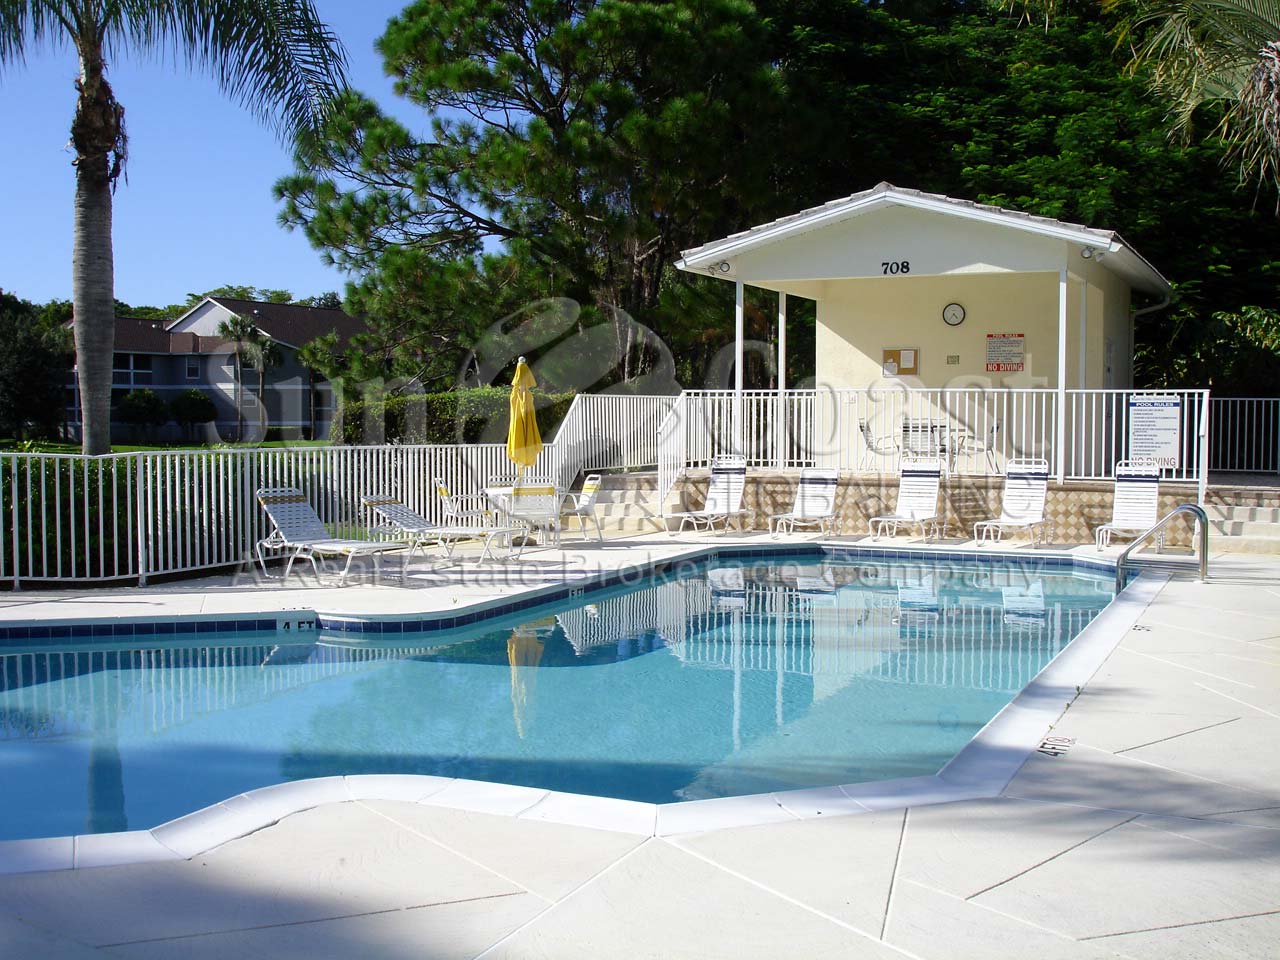 Wiggins Bay Villas Community Clubhouse and Pool 